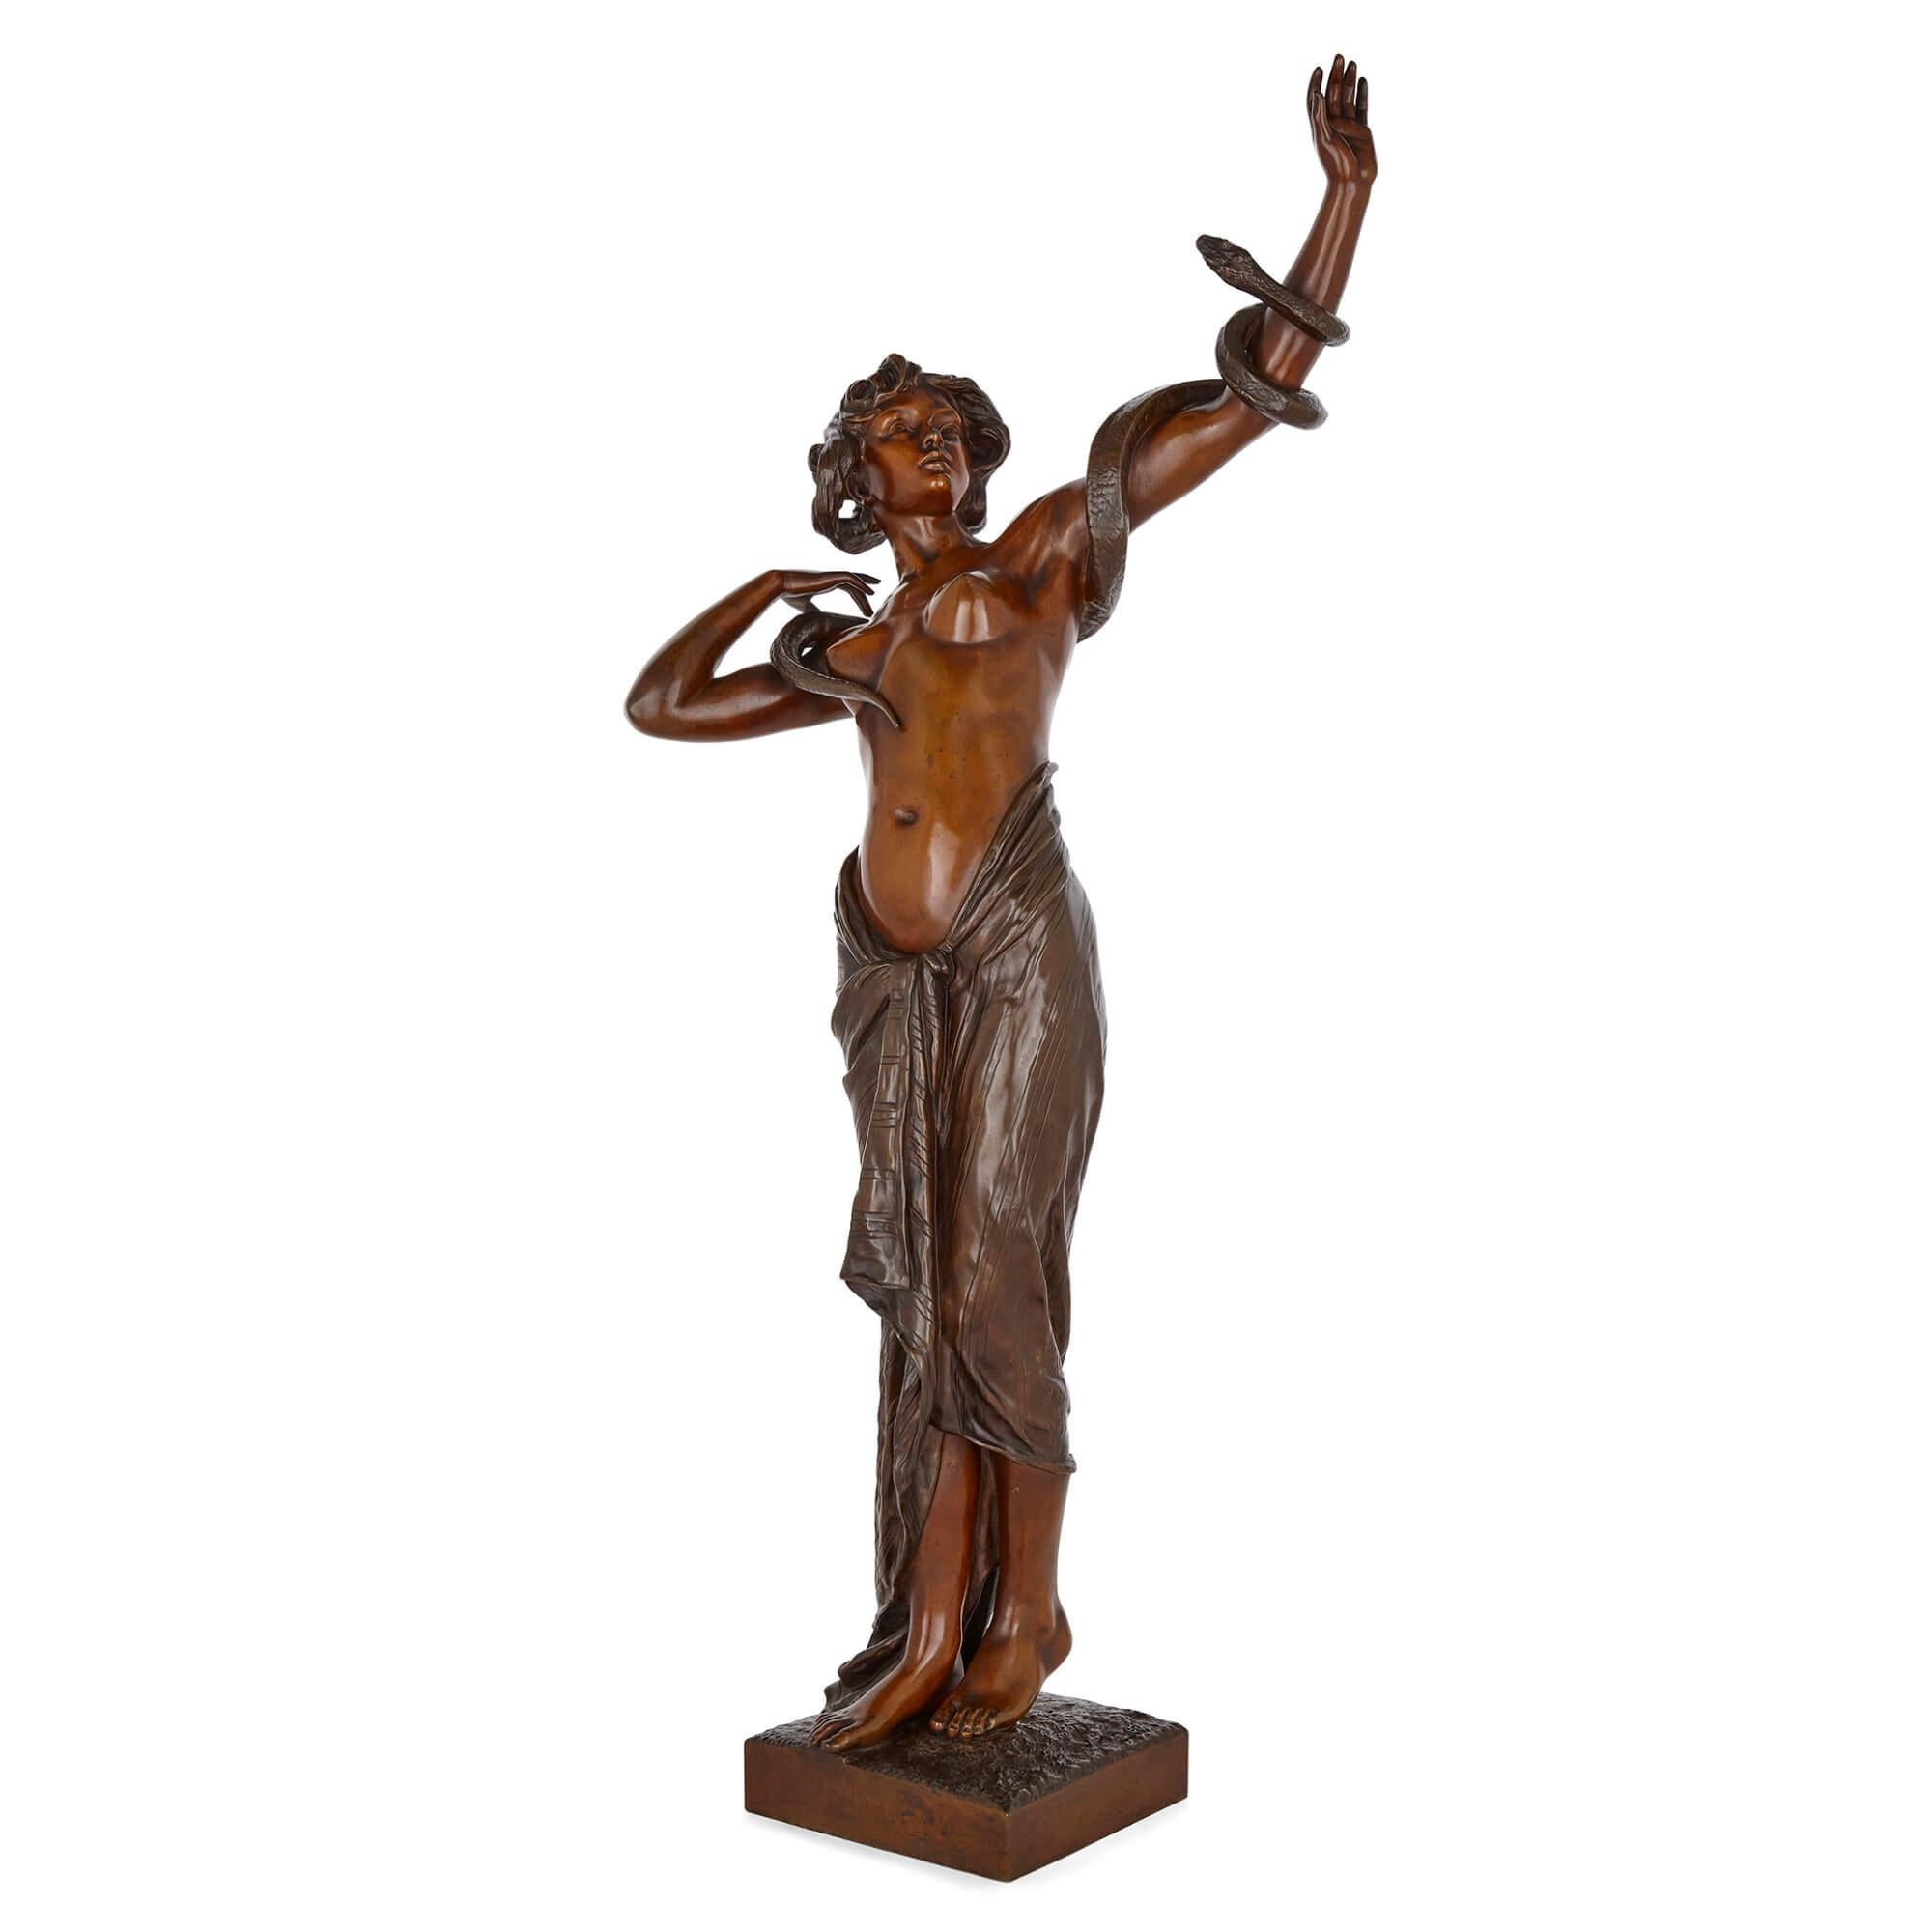 A large and rare bronze female figure by Goldscheider
Austrian, late 19th century
Measures: Height 85cm, width 38cm, 25cm

Large in size and all the rarer for having been cast in bronze, this superb female figure is by the Austrian artist and